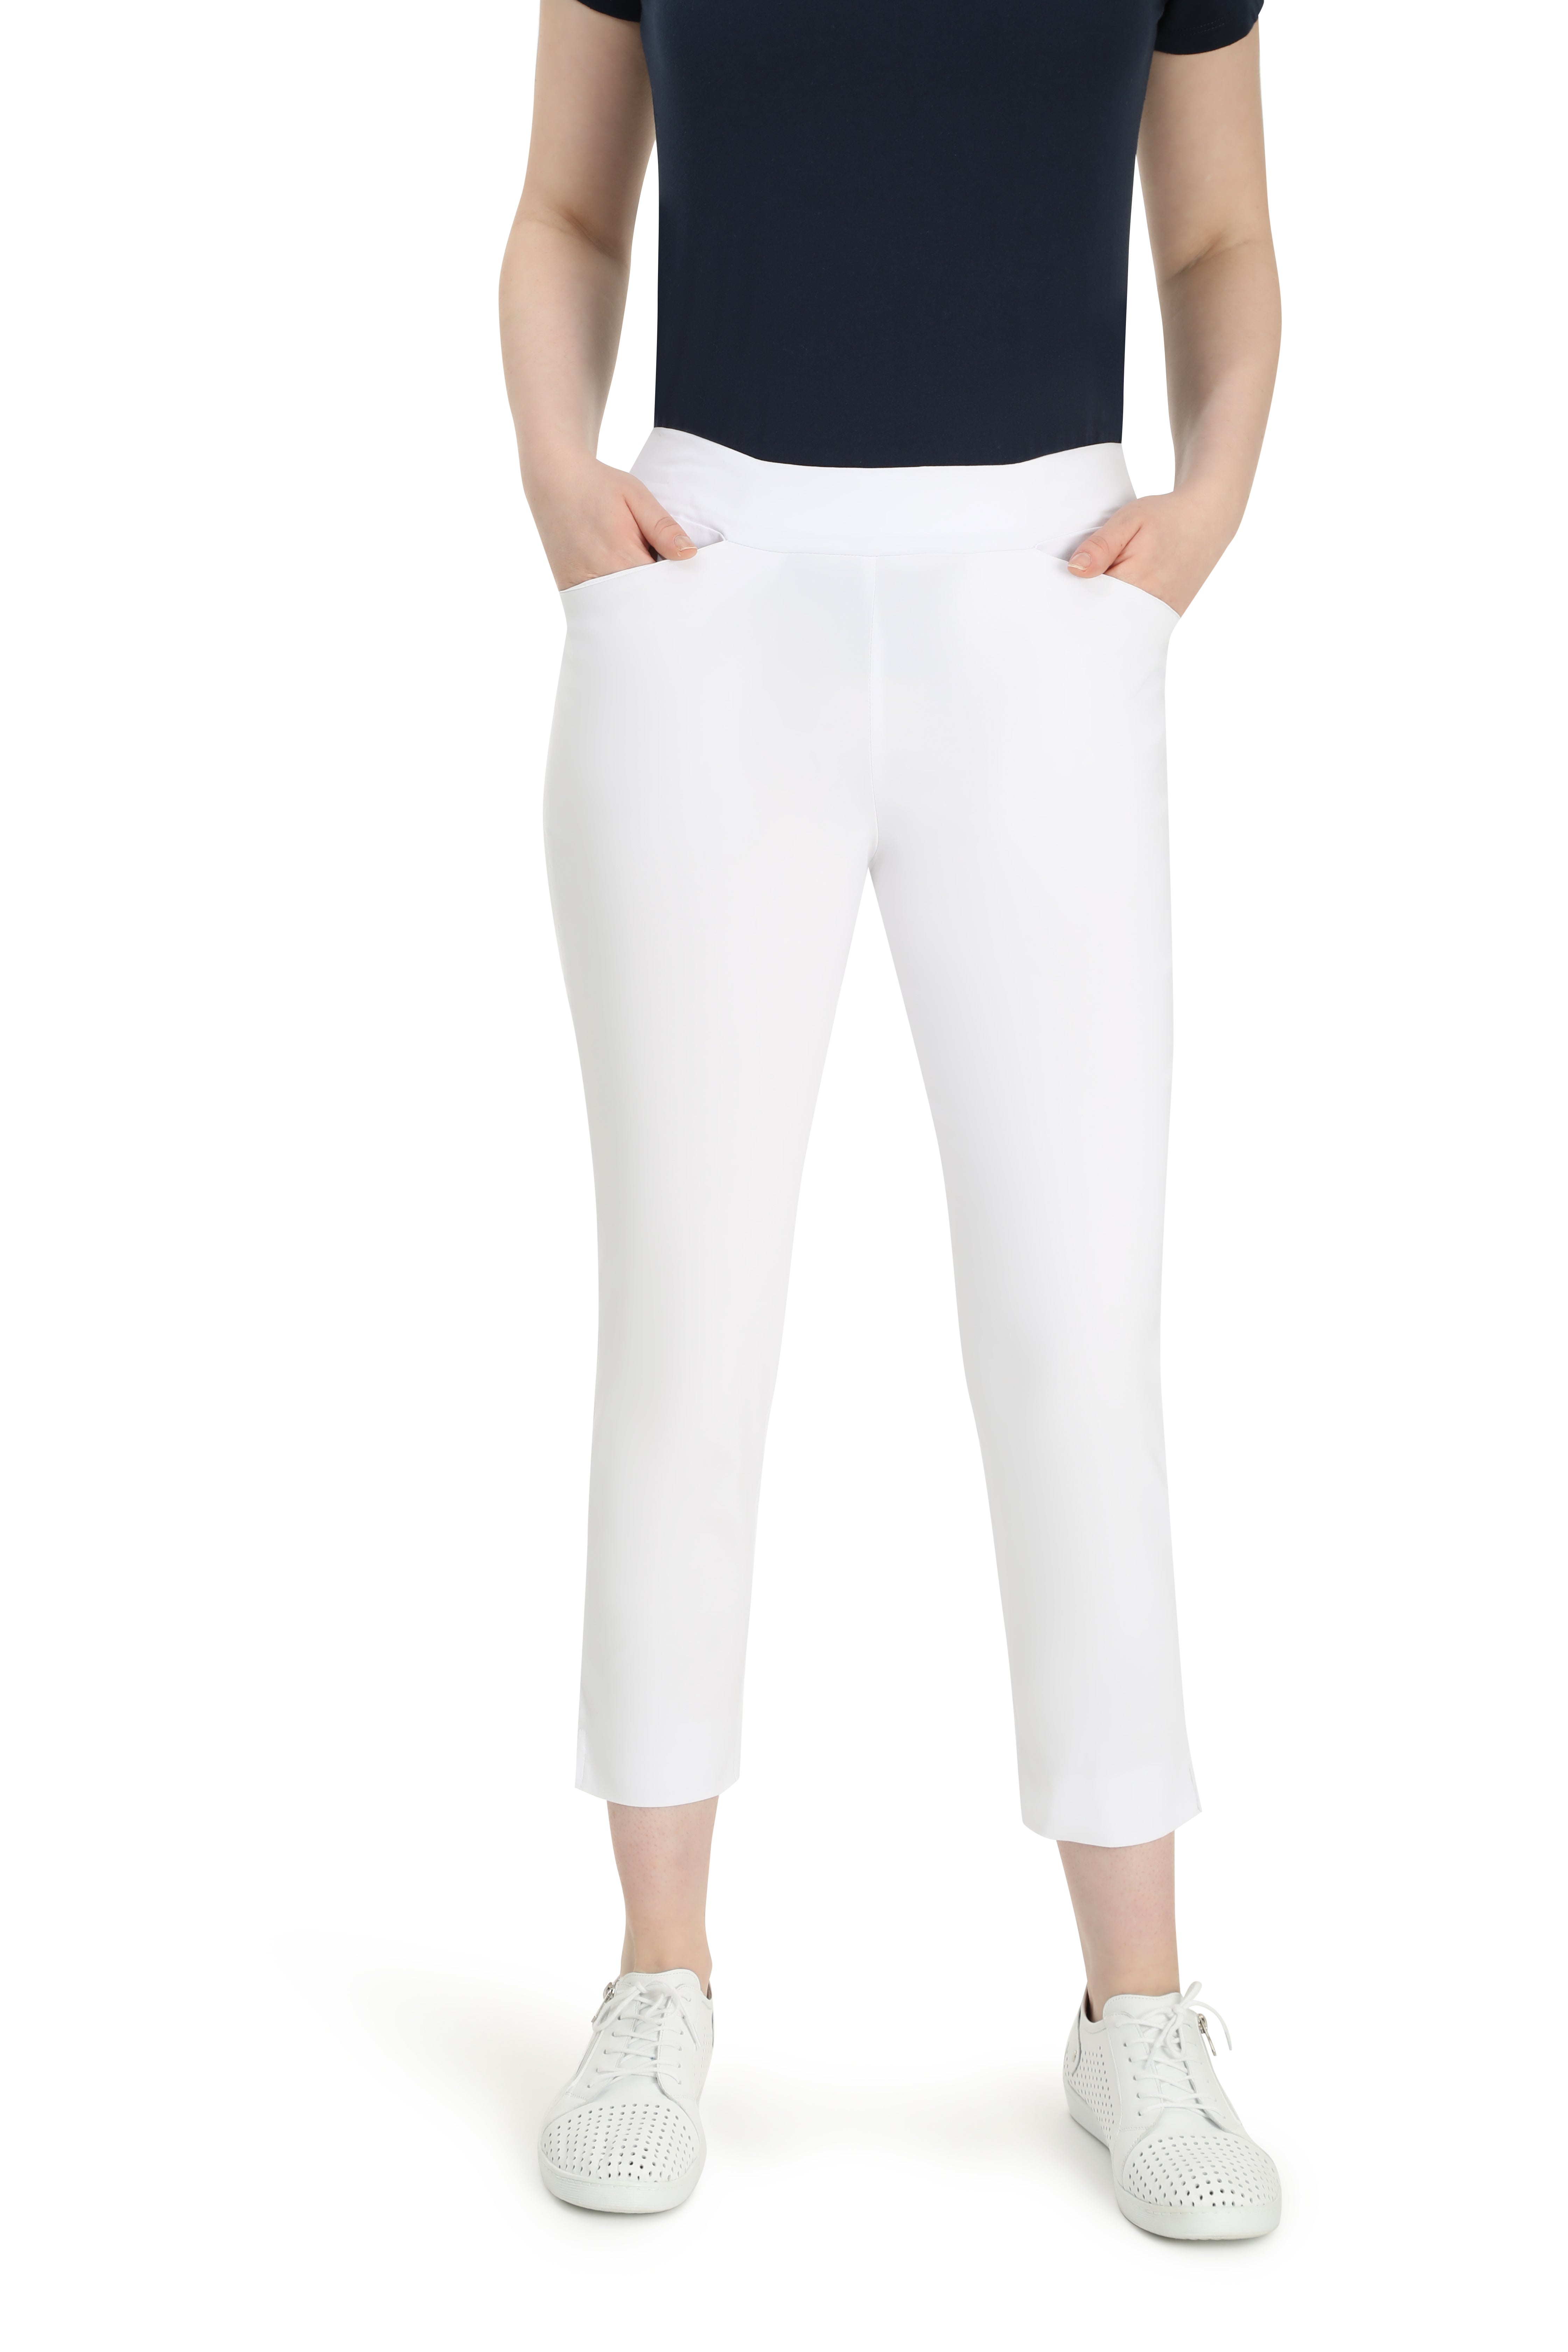 D.E.C.K By Decollage 2114 Cropped Trousers (7 Colours) – Missy Online:  Shoes, Fashion & Accessories Based in Leeds